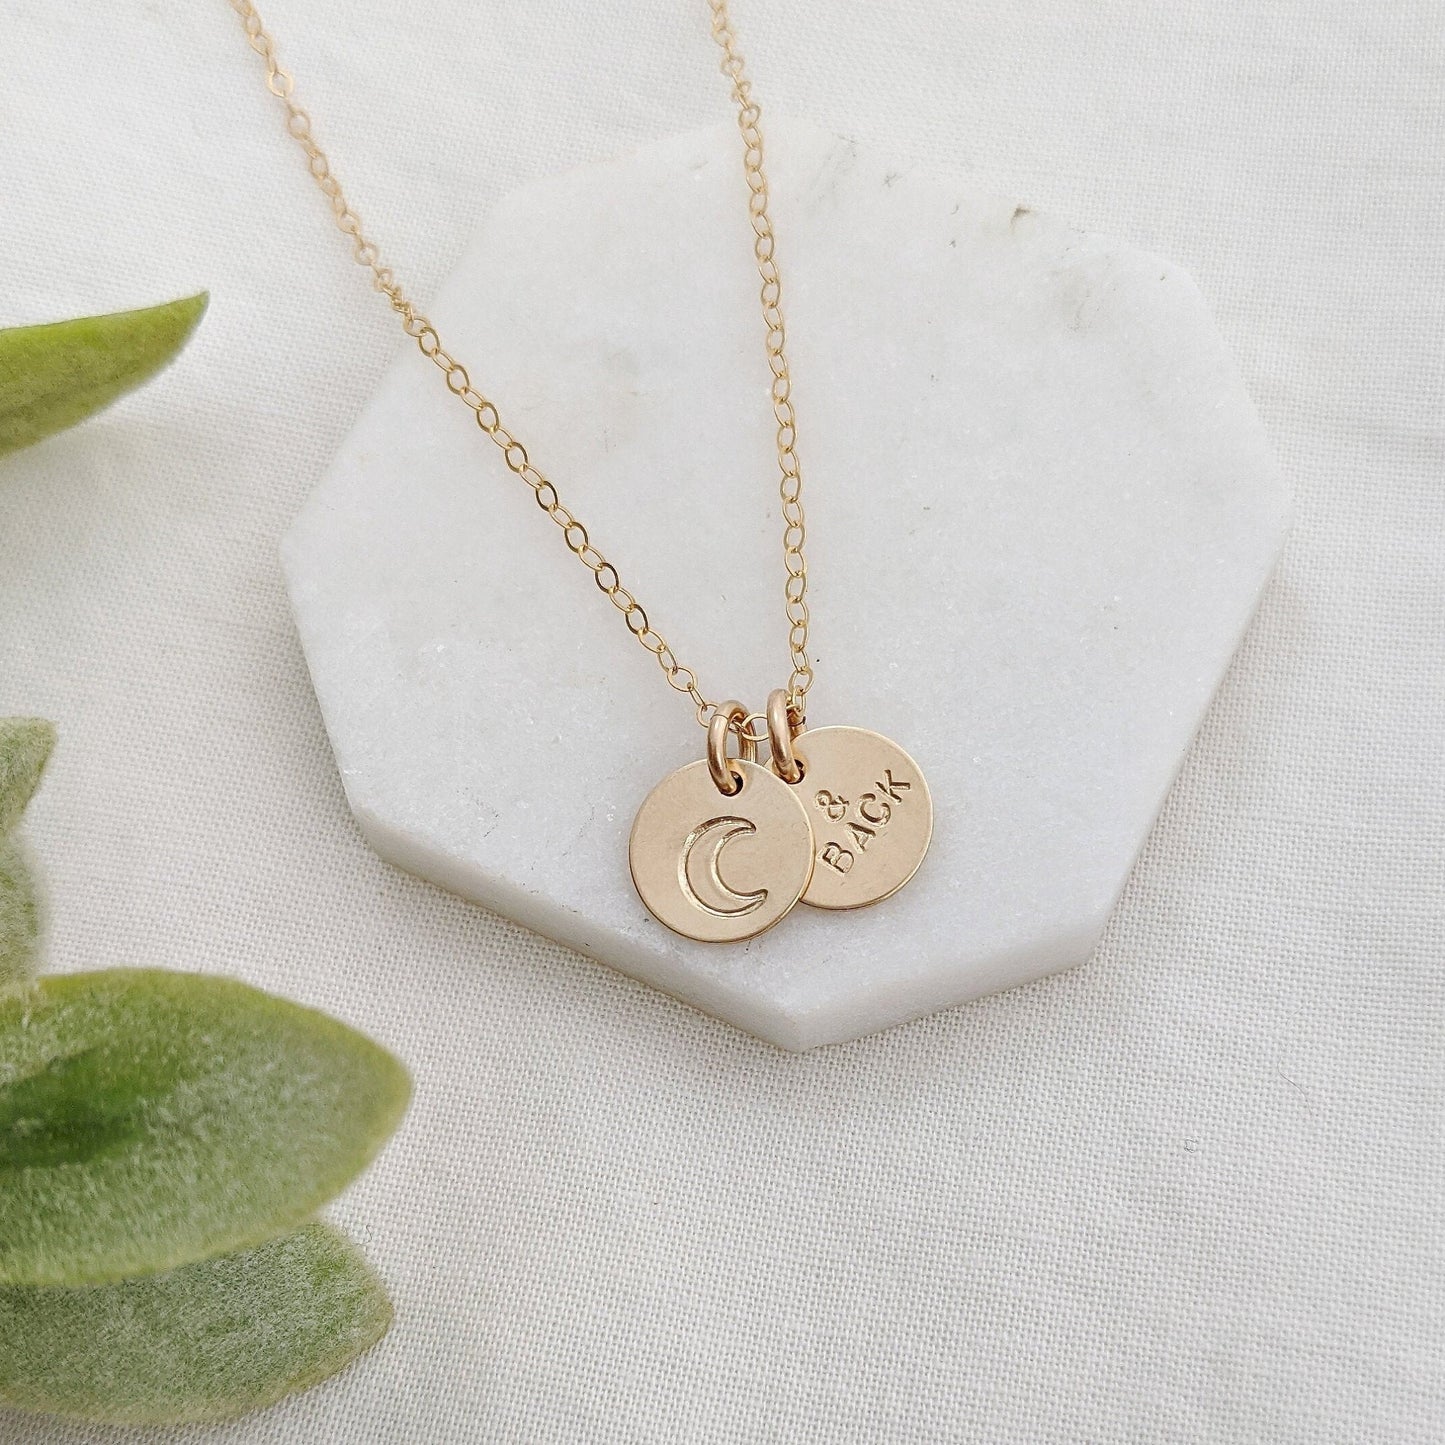 Love Moon Back Necklace Silver | Love Moon Back Jewelry | Mom Love Moon Back  - Love Moon - Aliexpress